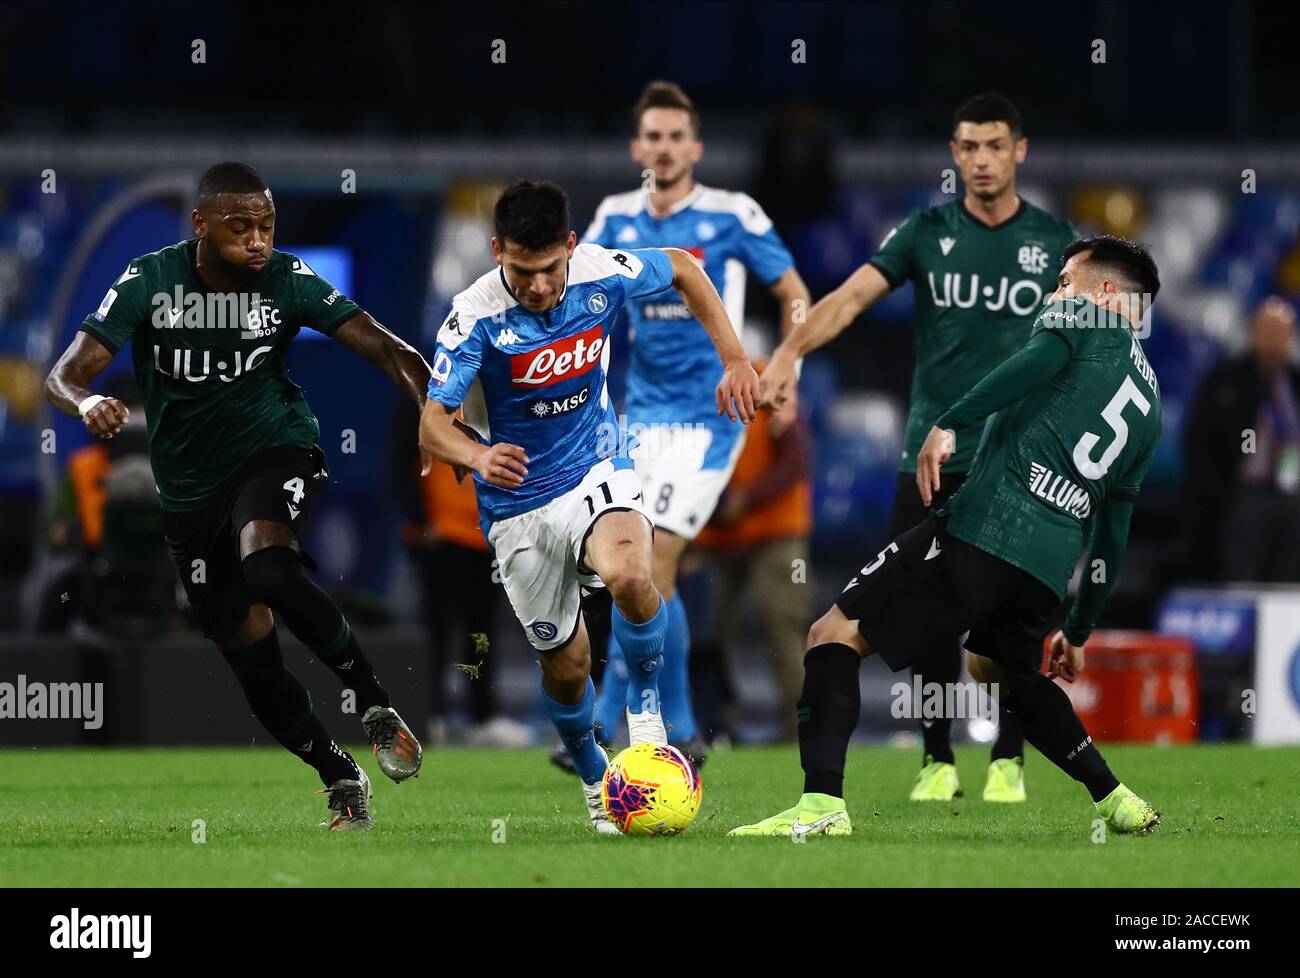 1st December 2019; Stadio San Paolo, Naples, Campania, Italy; Serie A Football, Napoli versus Bologna; Hirving Lozano of Napoli is challenged by Stefano Denswil of Bologna - Editorial Use Stock Photo